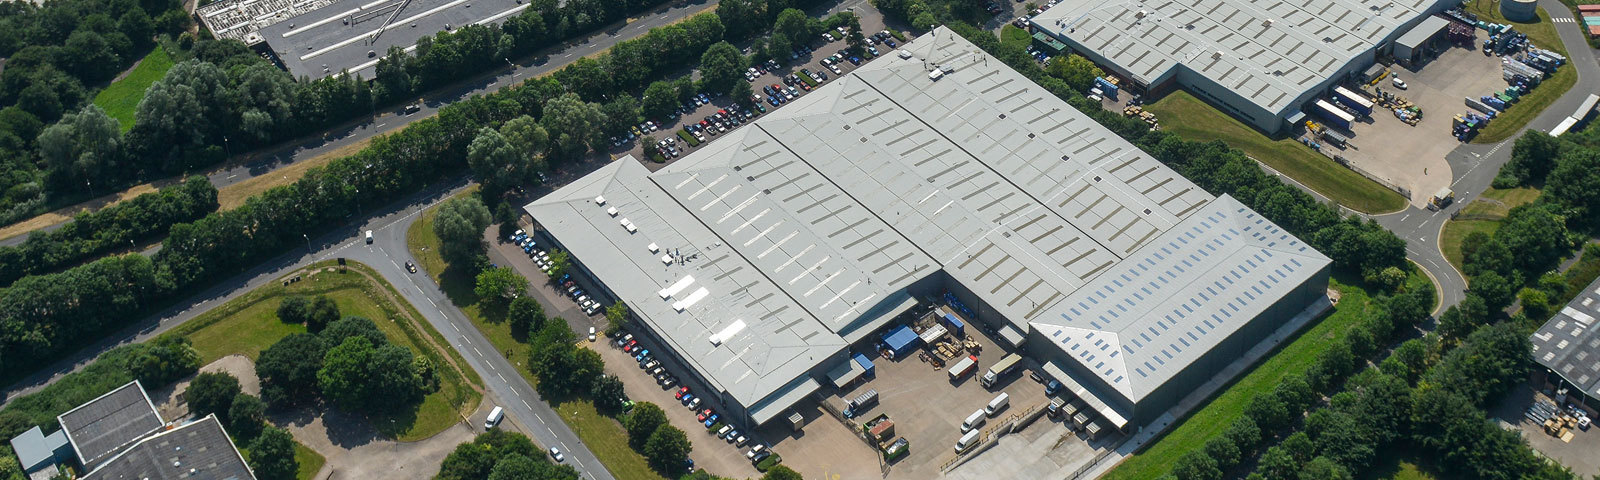 Thorlux Opens New Warehouse and Distribution Centre